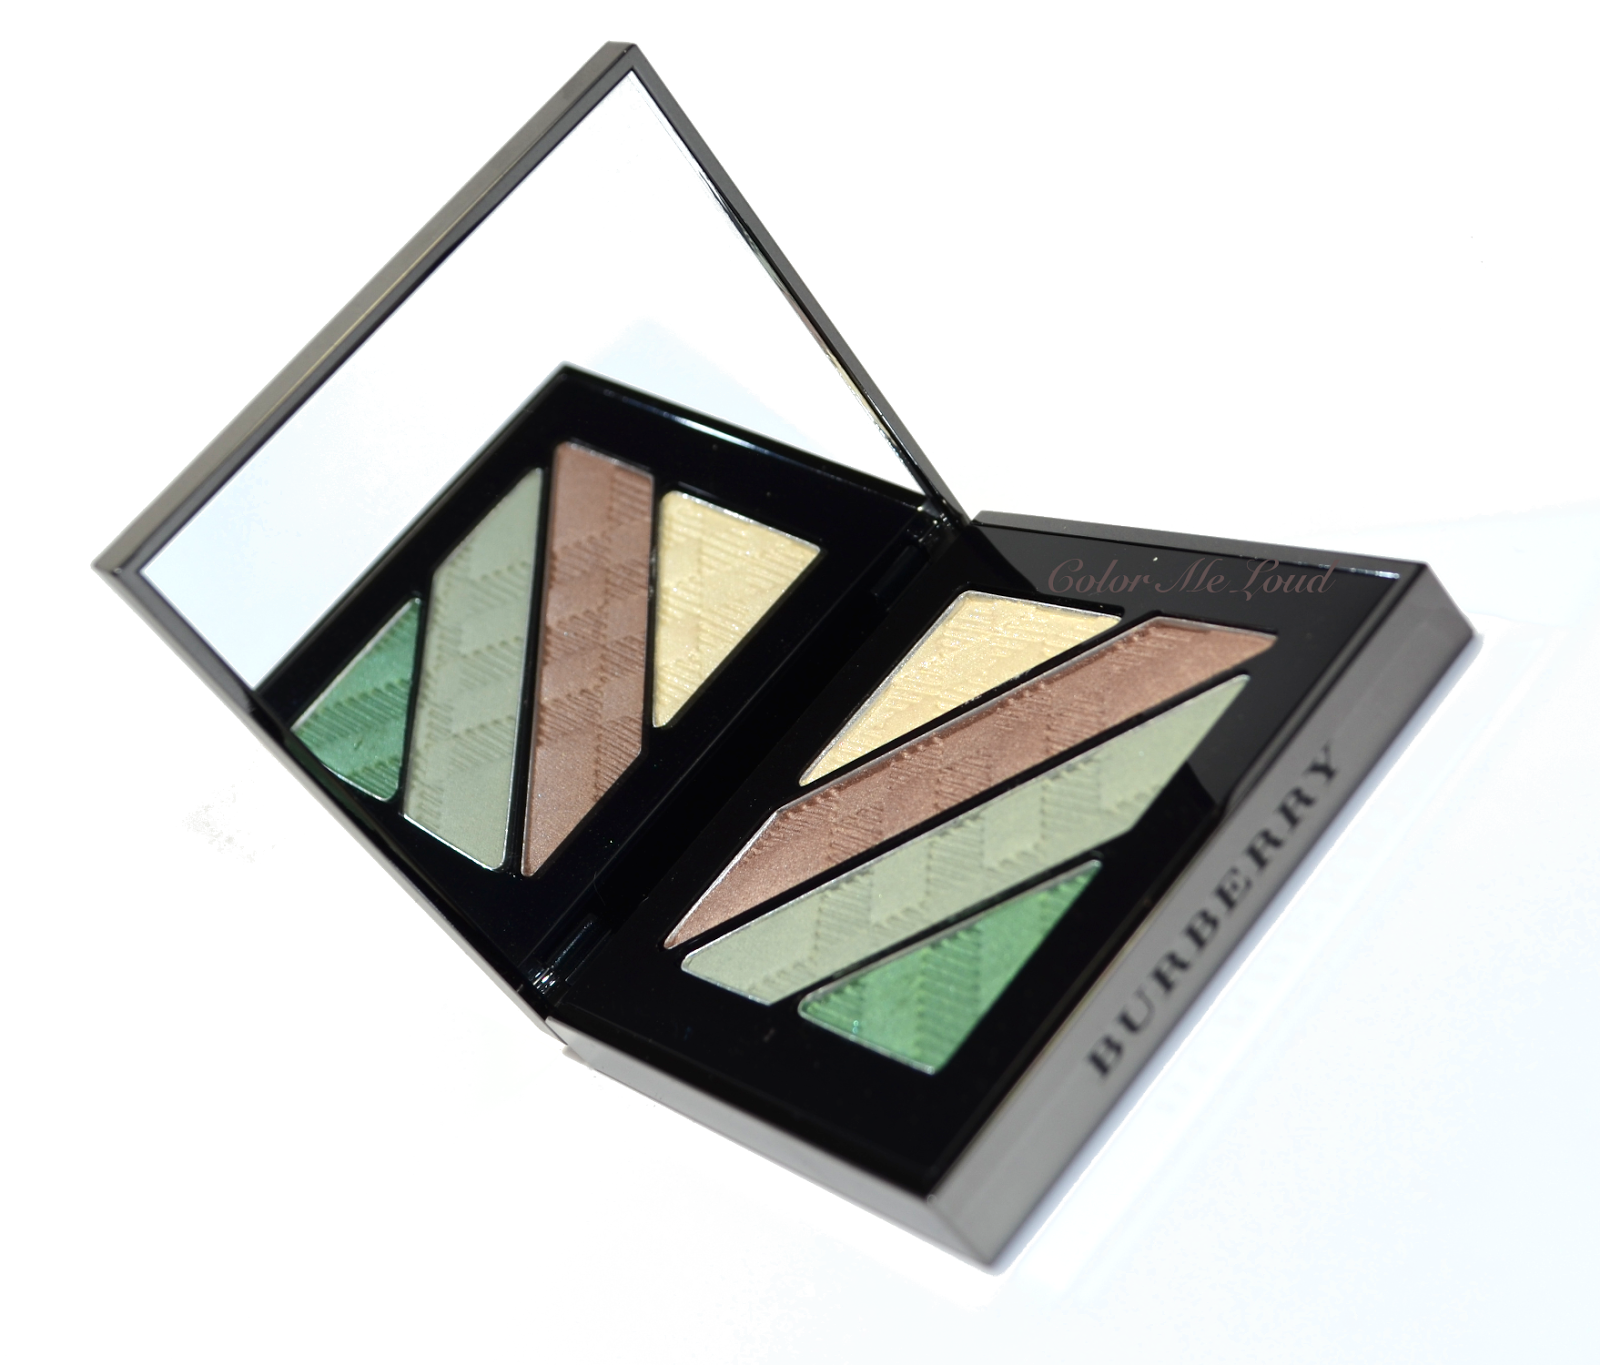 Burberry Complete Eye Palette #15 Sage Green from Spring 2014 Collection, Review & Comparison